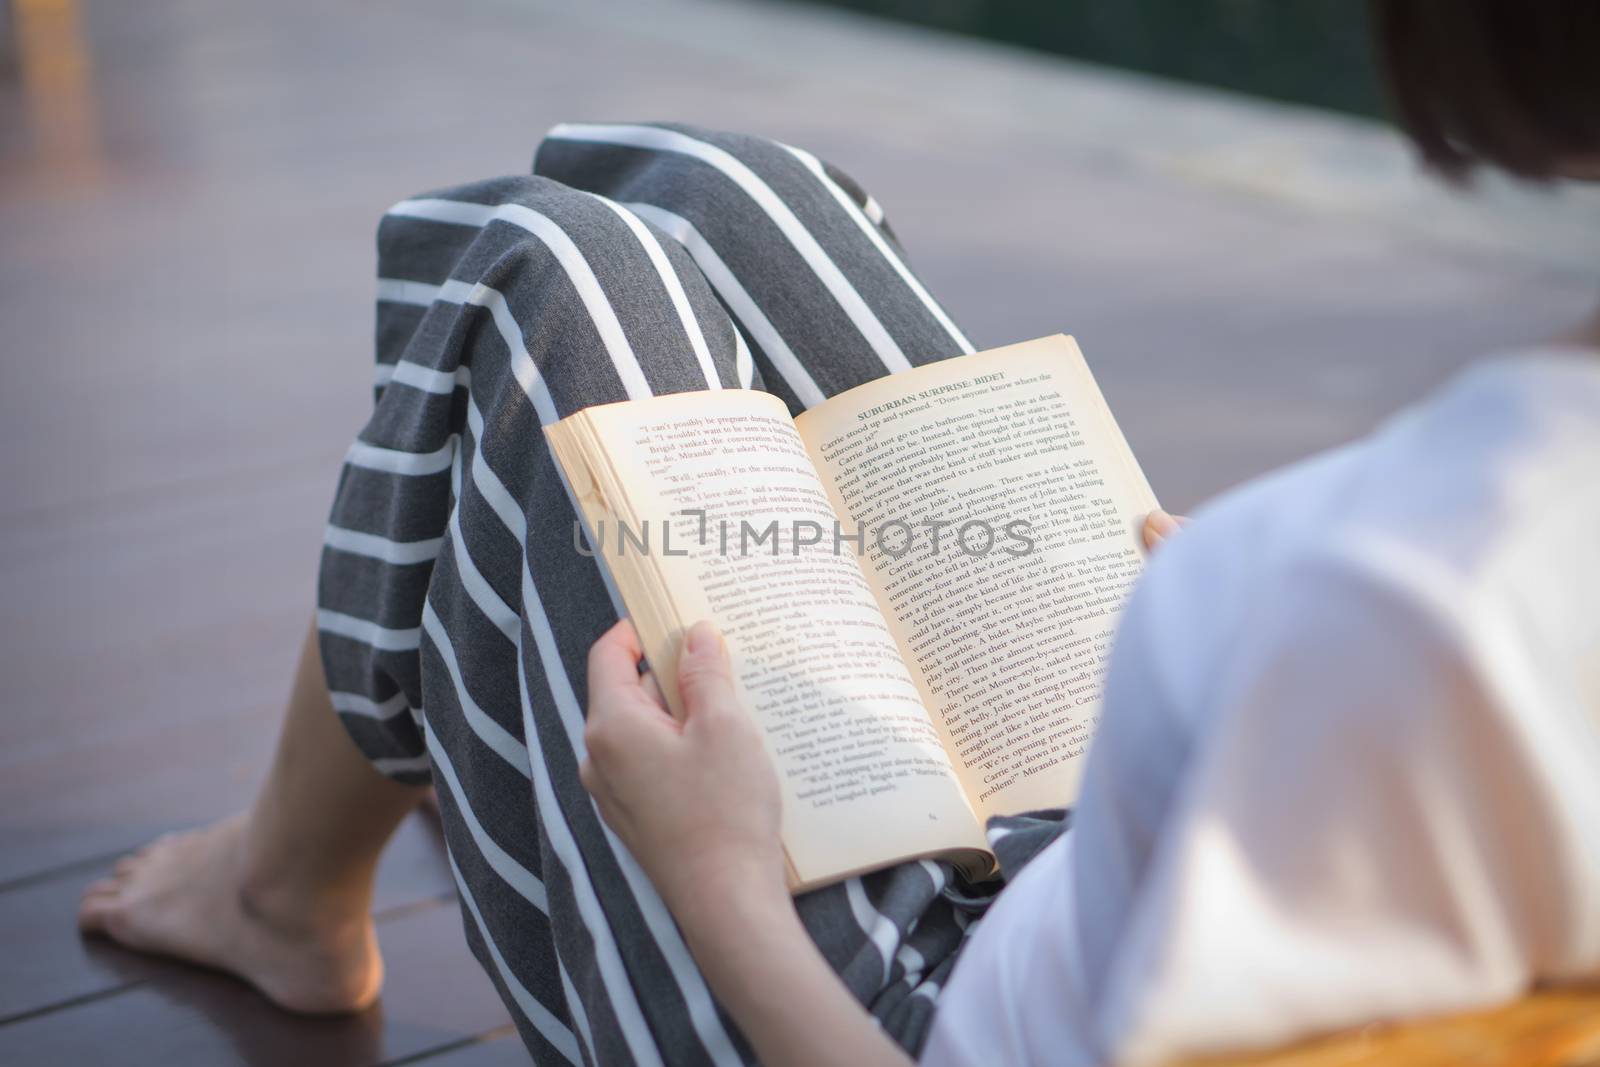 Beautiful young woman reading book on sun lounger by swimming pool